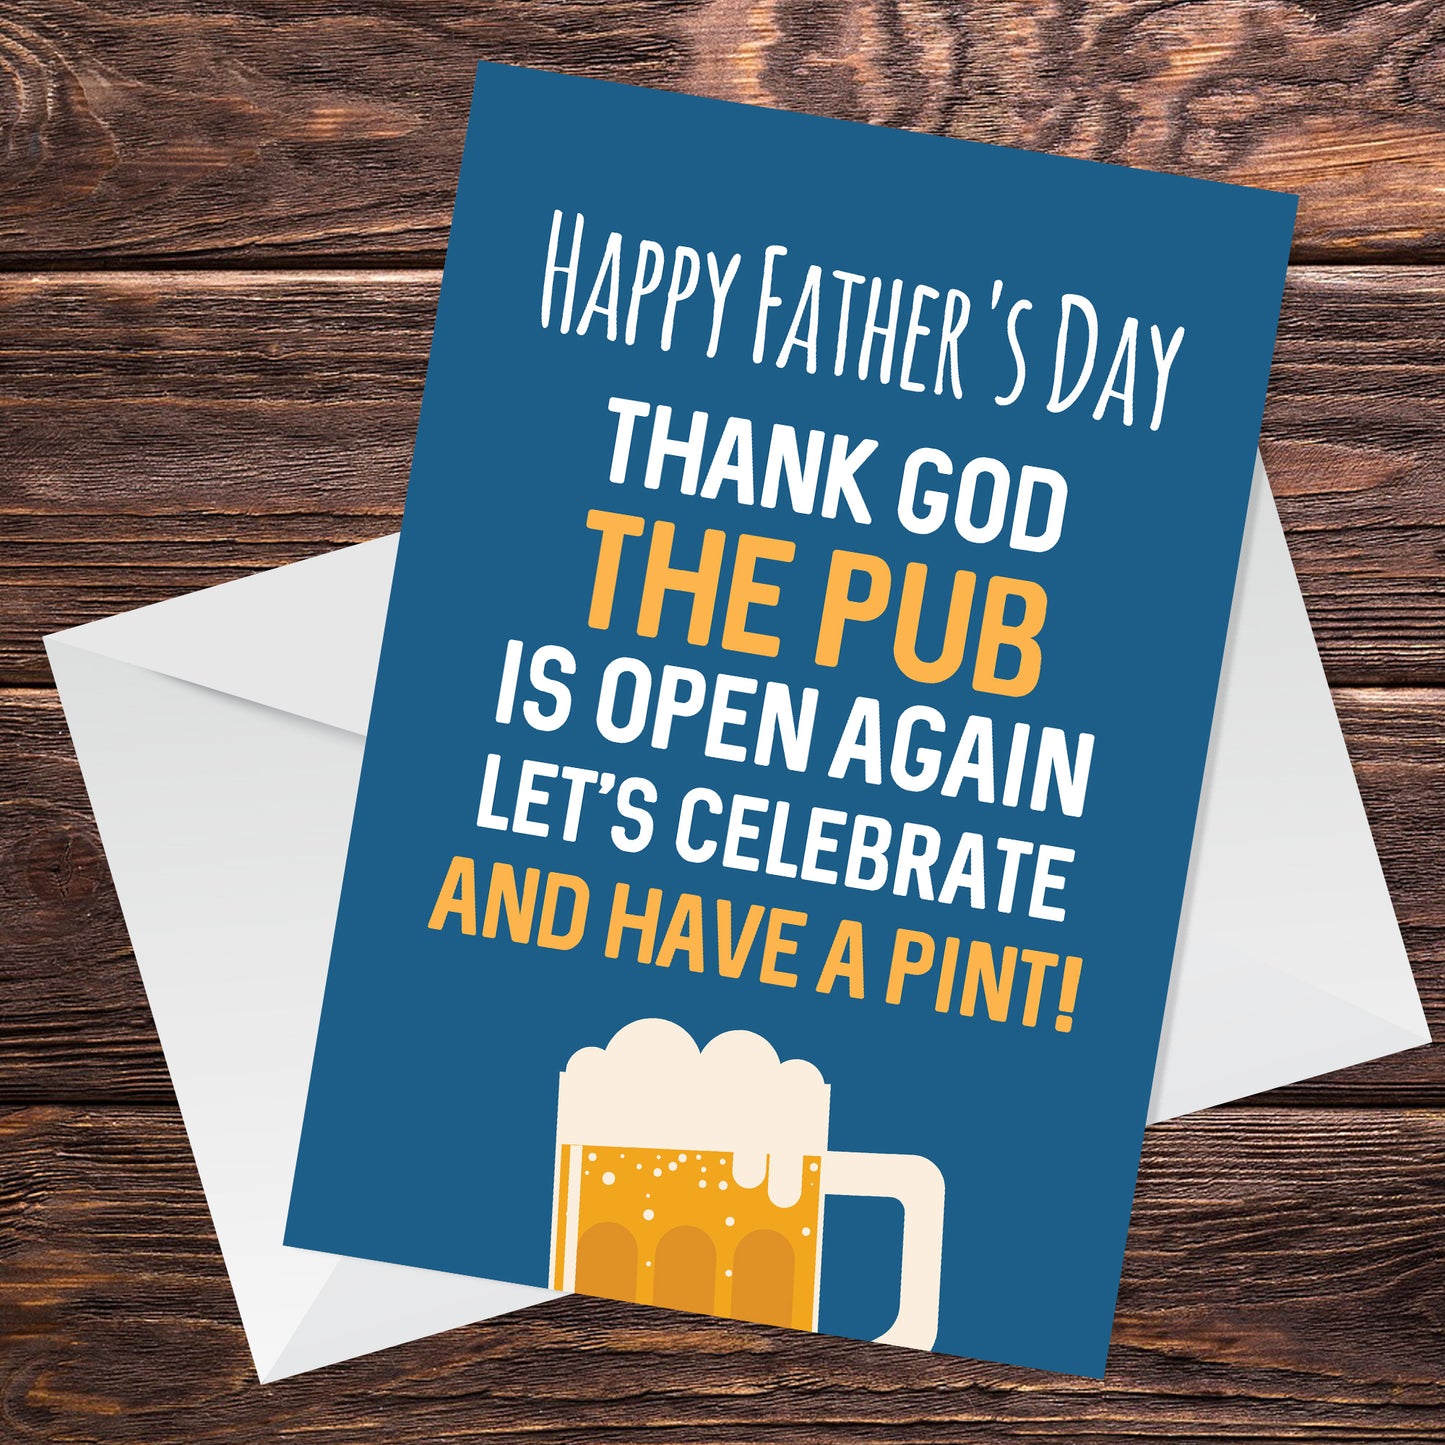 Funny Fathers Day Card Comedy Humour Cheeky Joke Dad Father